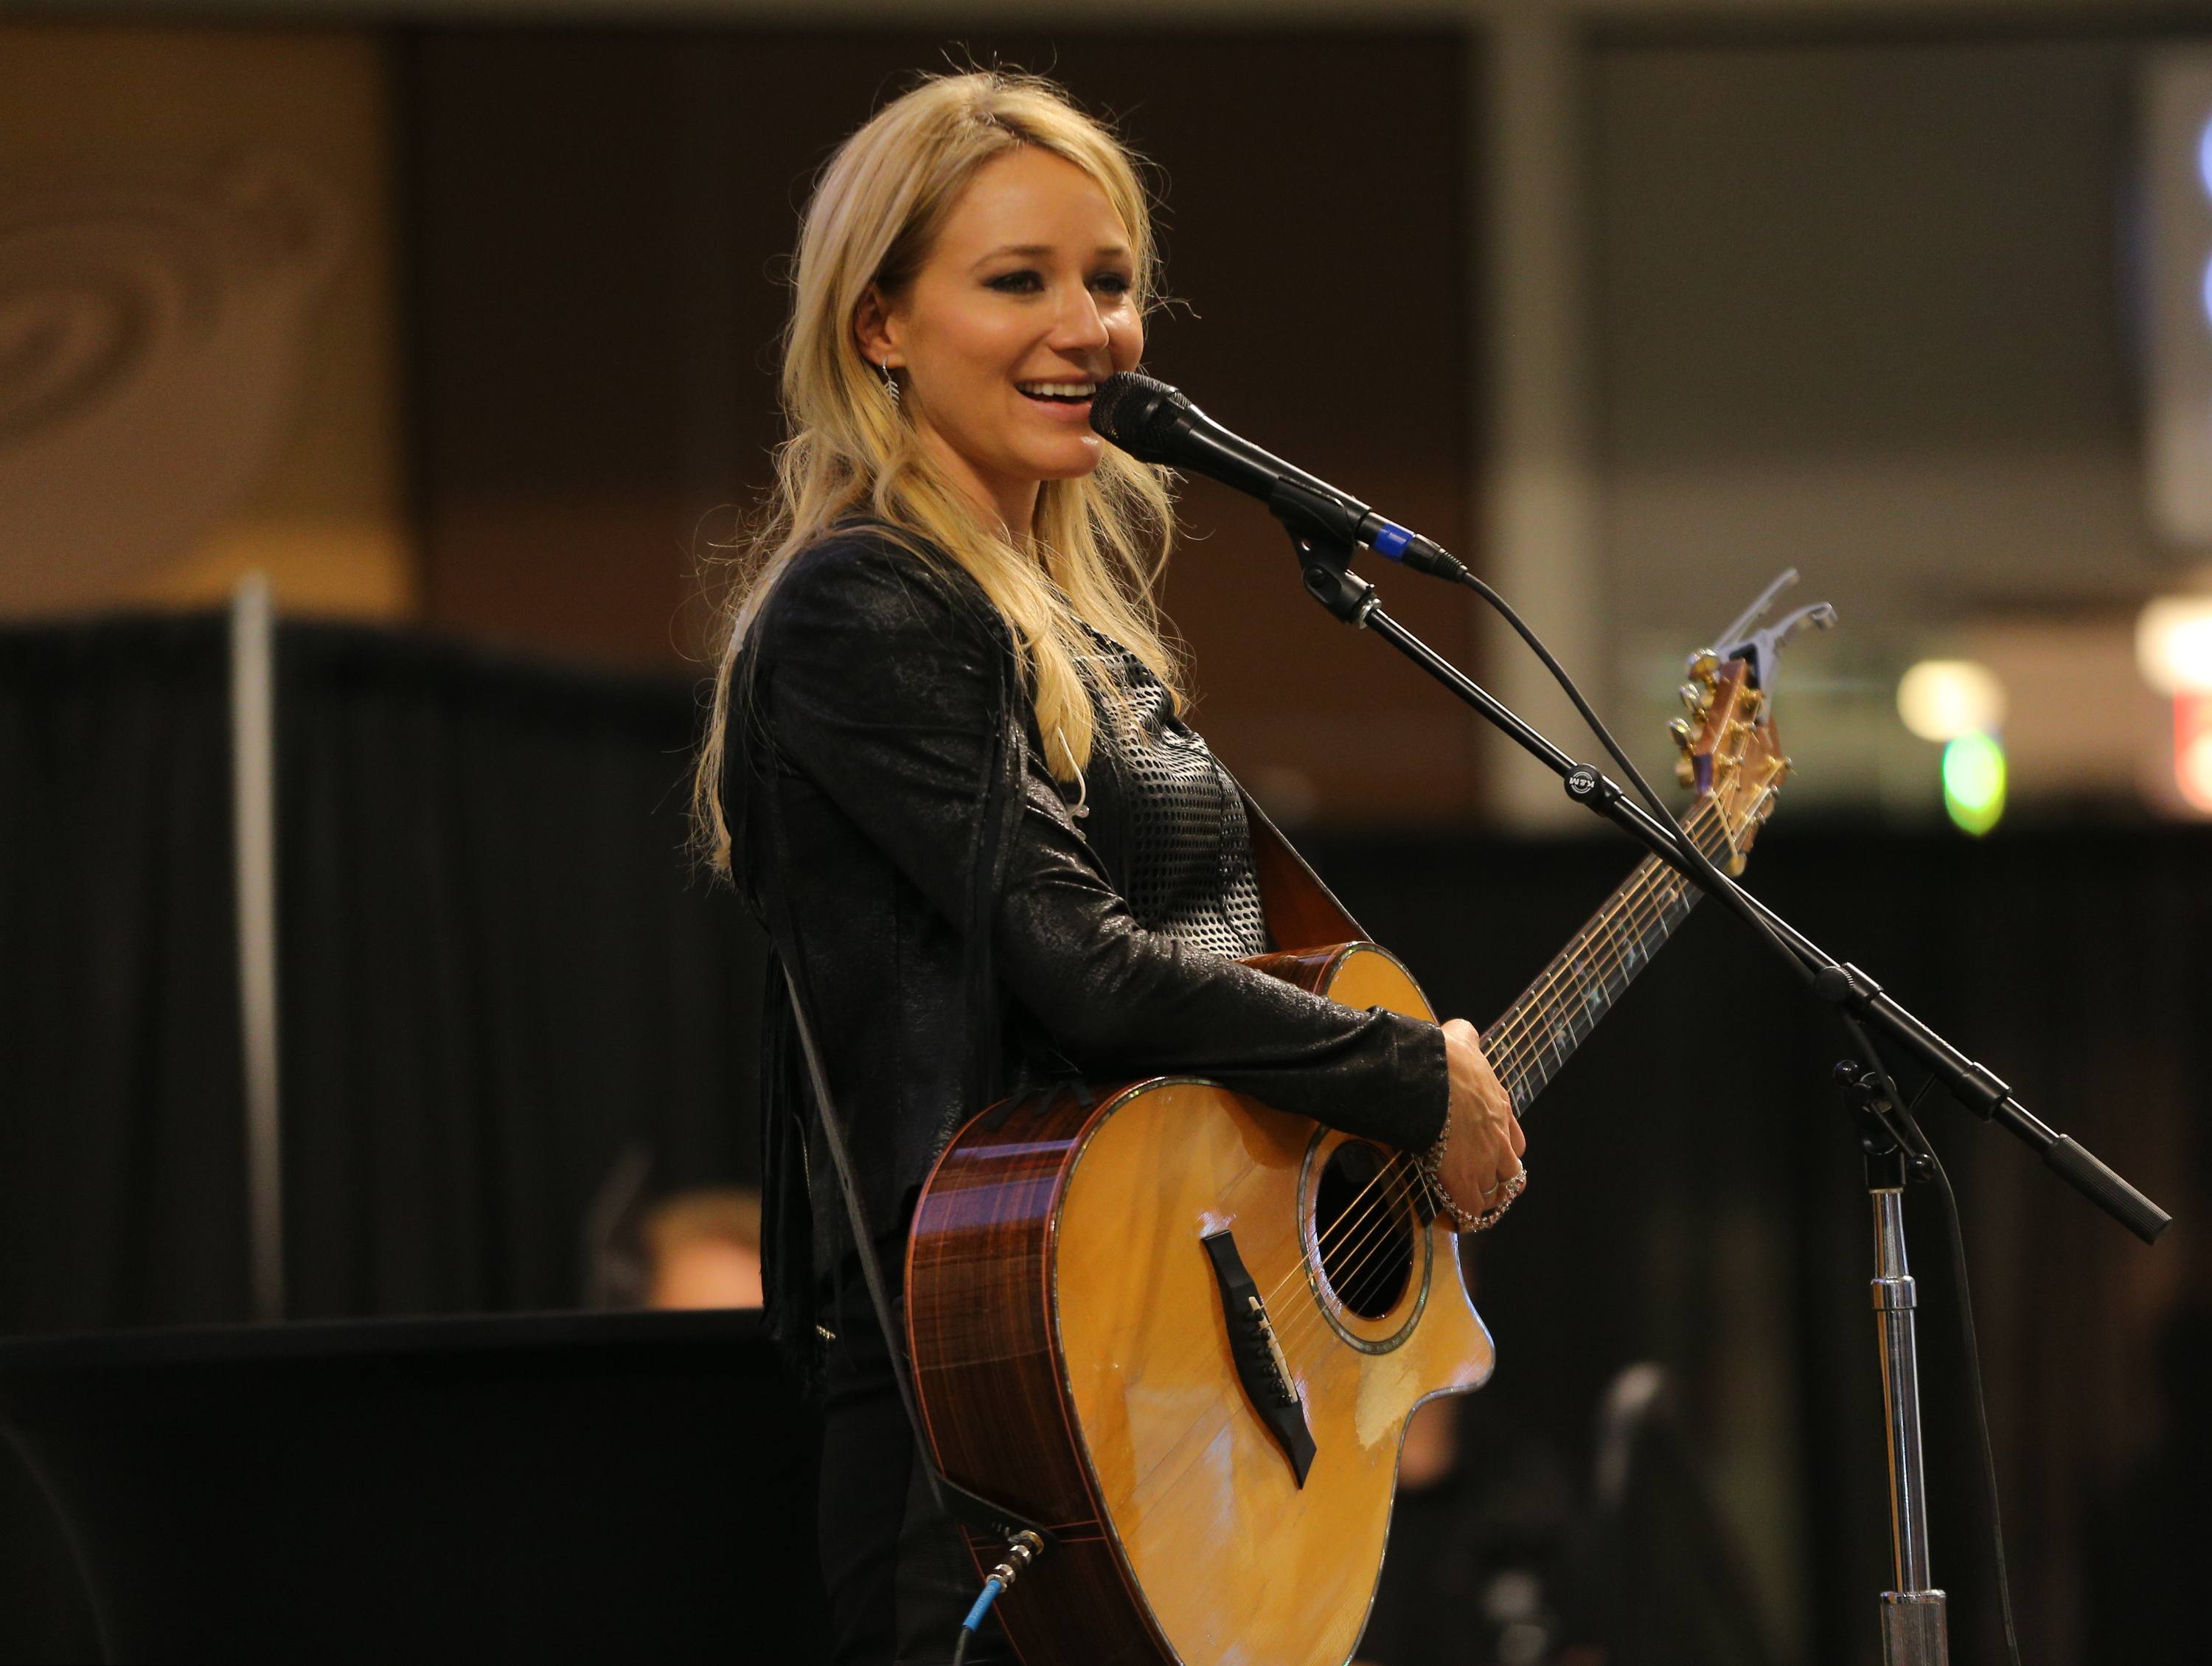 Jewel Kilcher performs and greet with fans at Mall of America